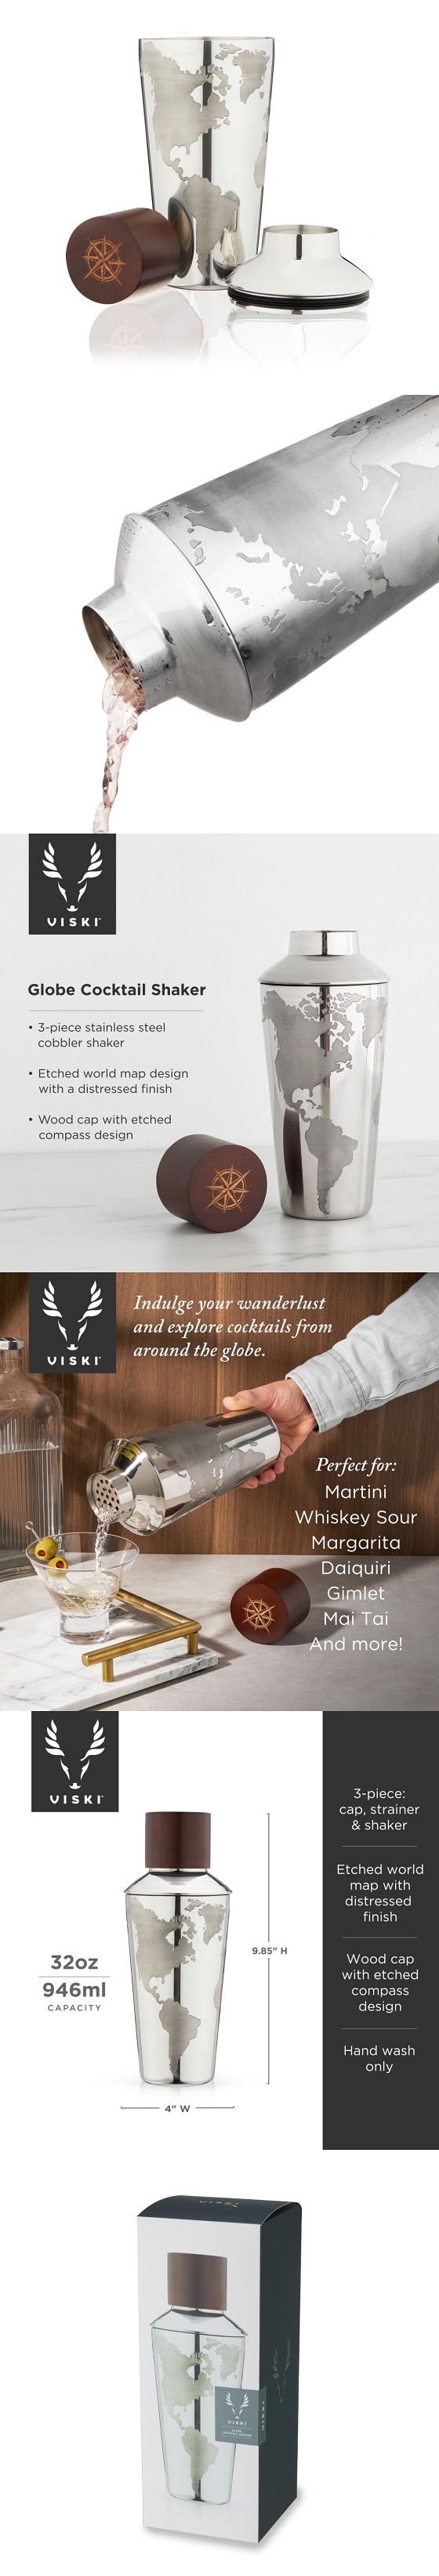 Globe Graphic Cocktail Shaker with Compass-Etched Wood Cap by VISKI